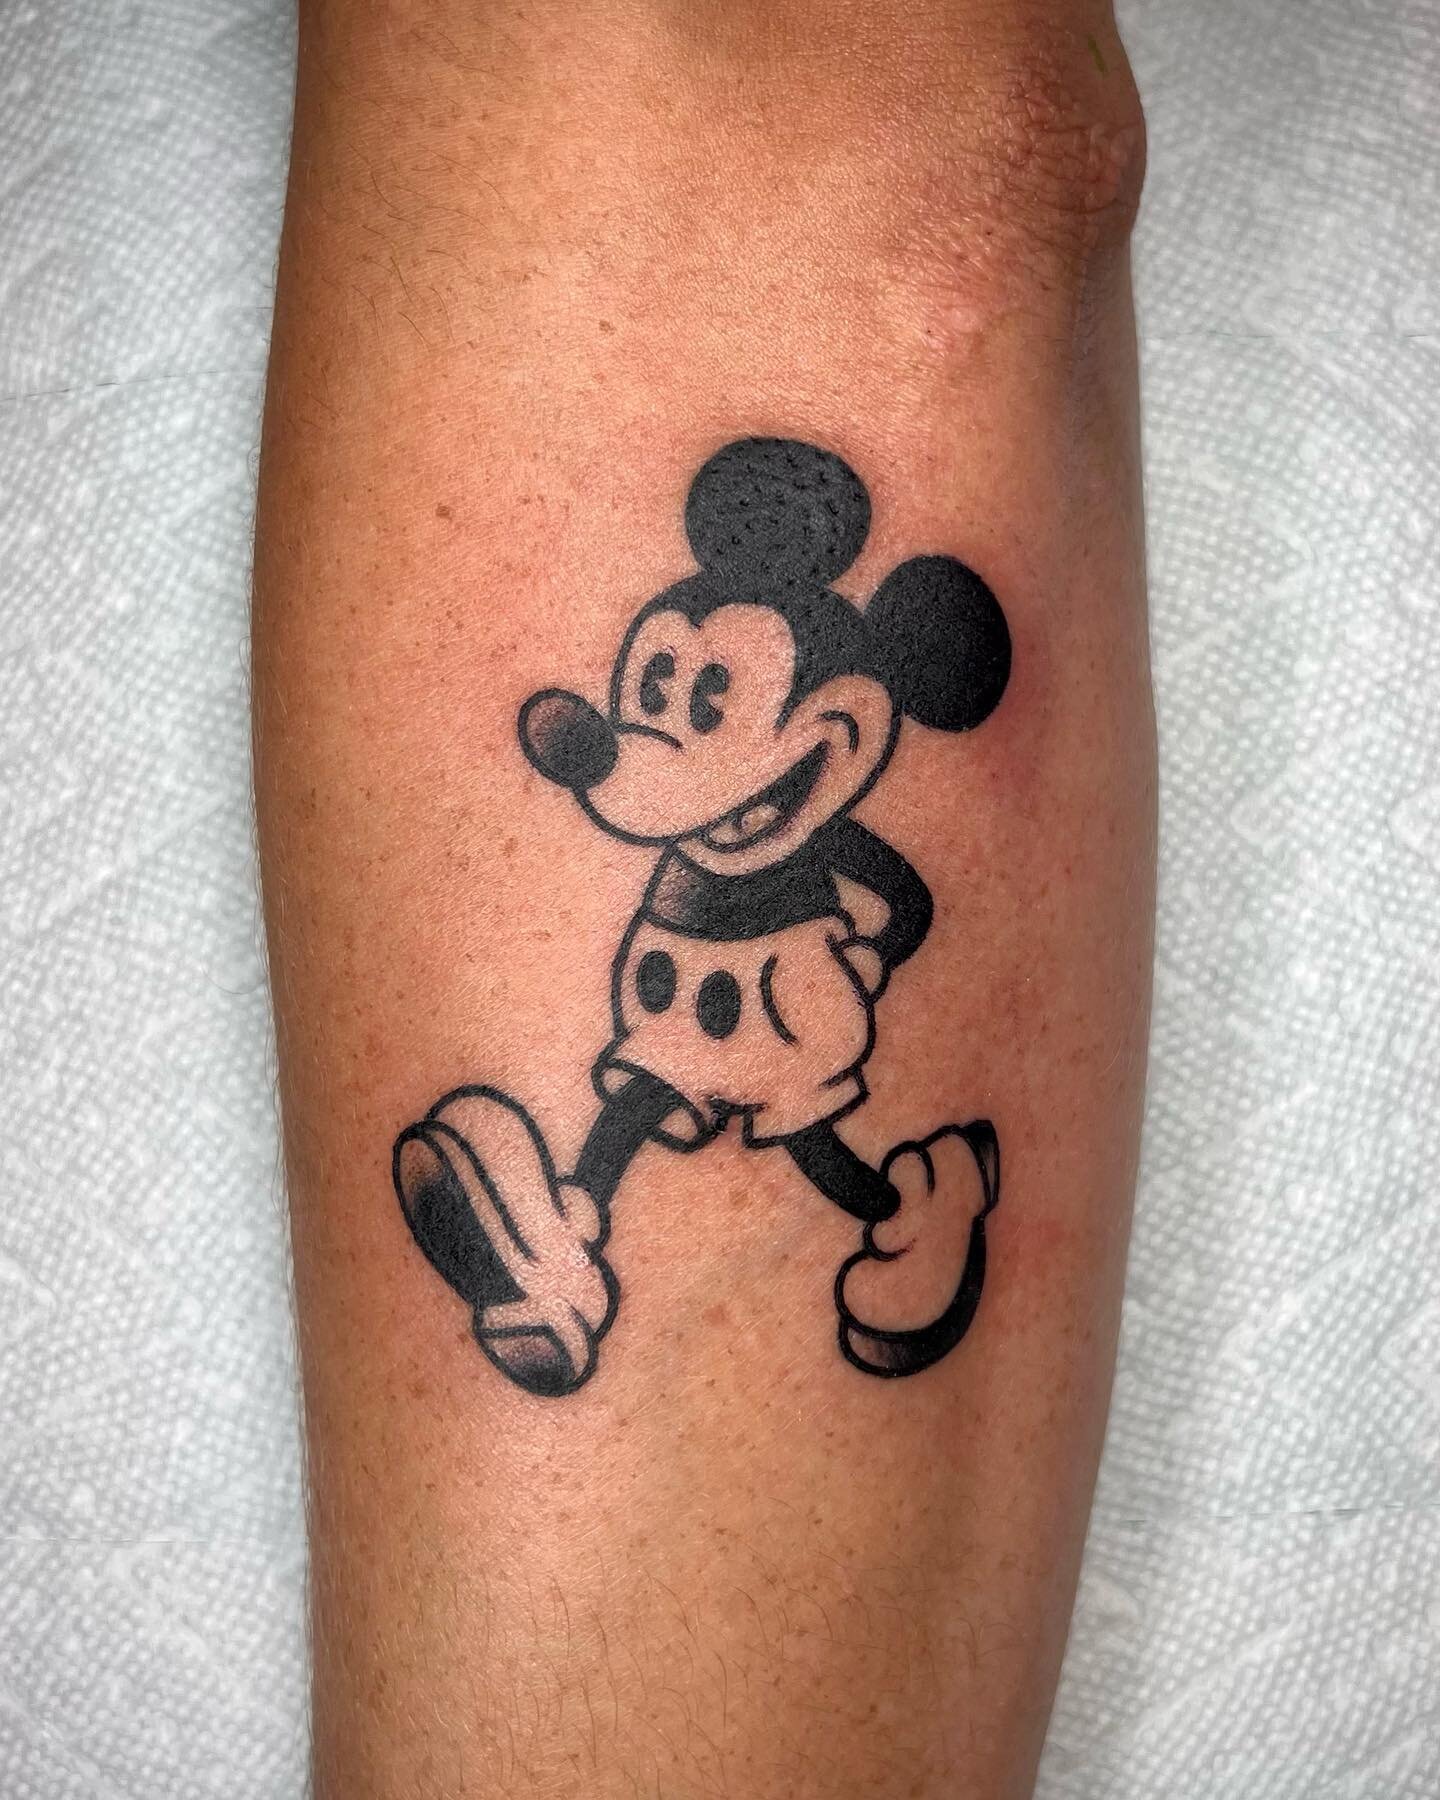 Mickey for Noah, made @victorytattooing